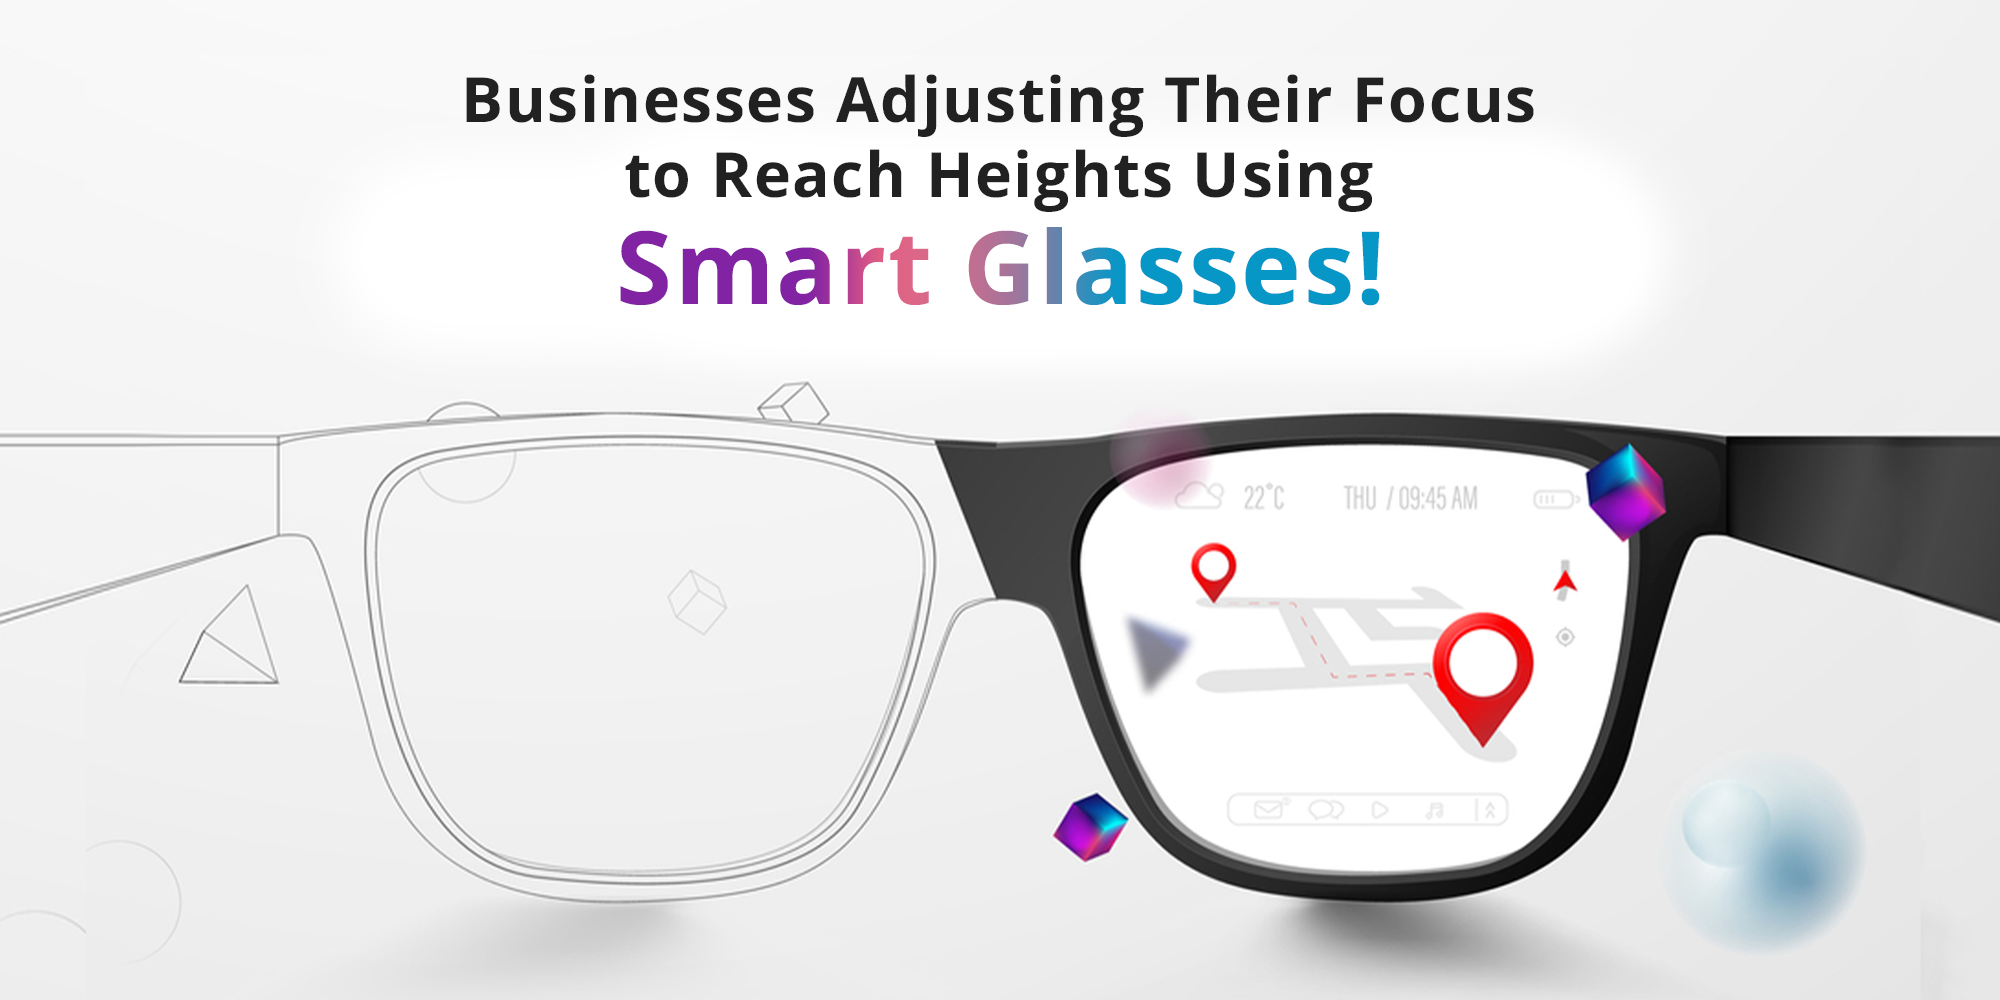 Businesses Adjusting Their Focus to Reach Heights Using Smart Glasses!